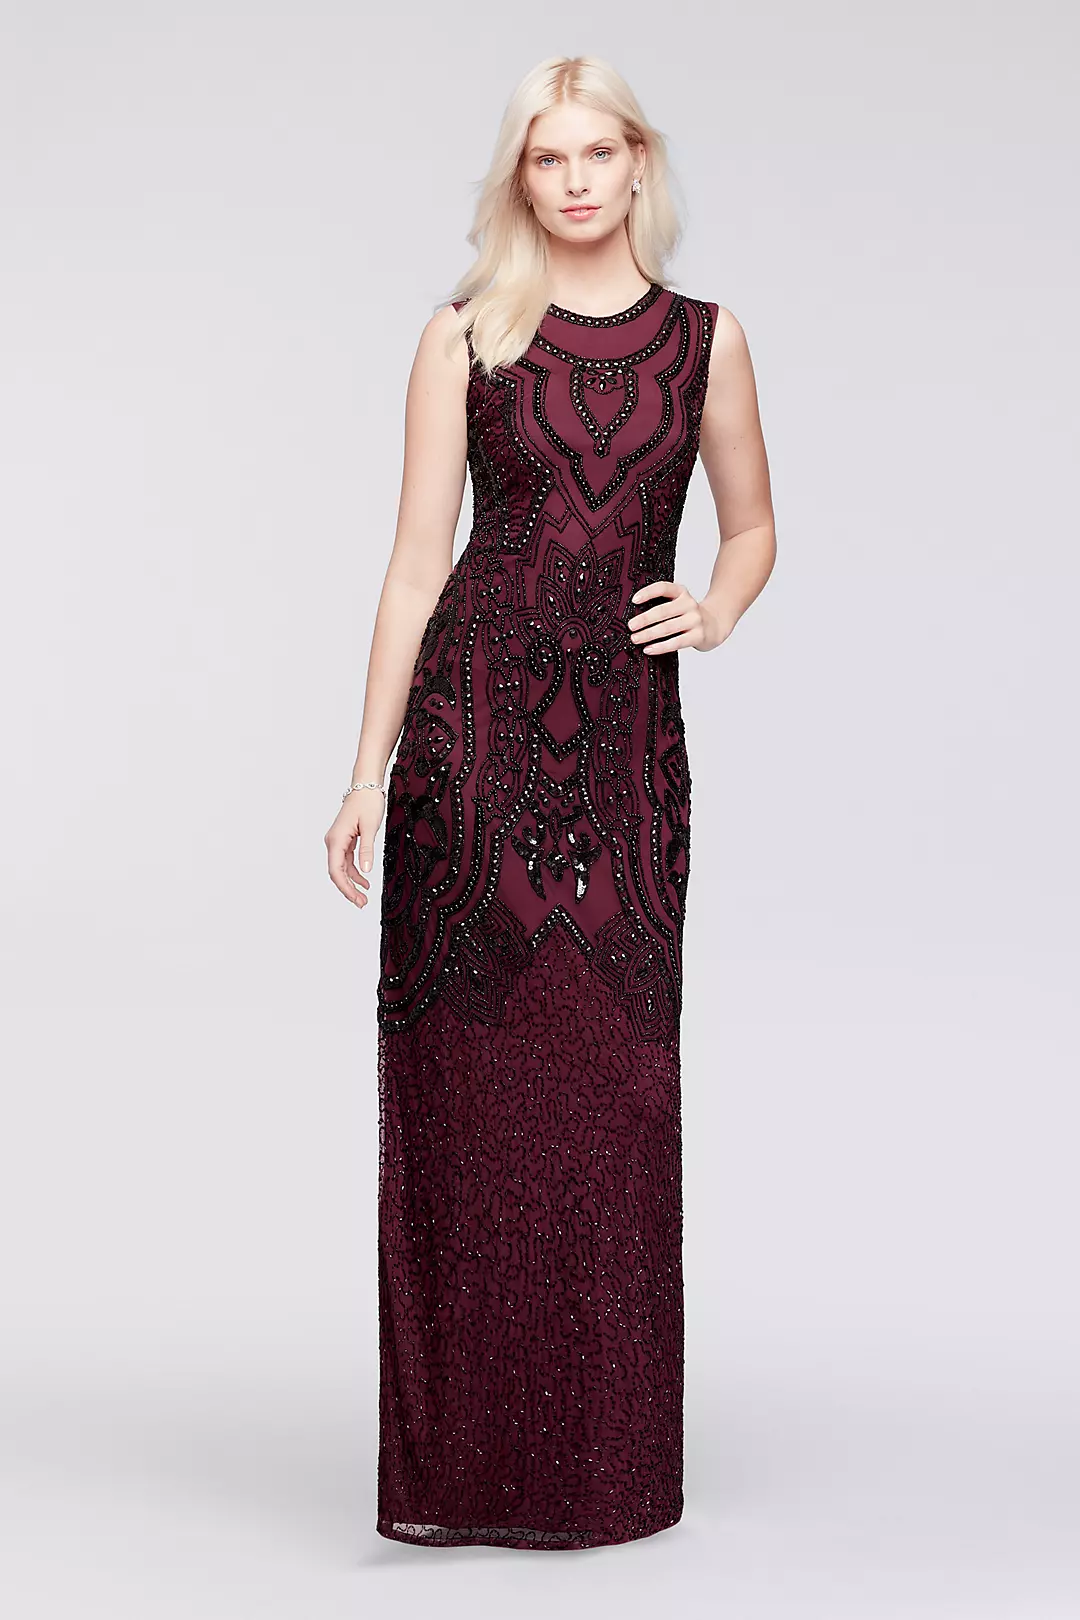 Beaded Long Dress with Cap Sleeves Image